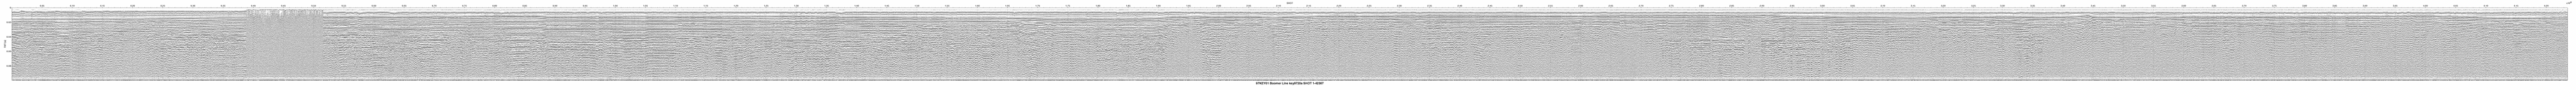 Thumbnail GIF image of the seismic trackline key9720a, with a hotlink to the more detailed, larger JPG image.